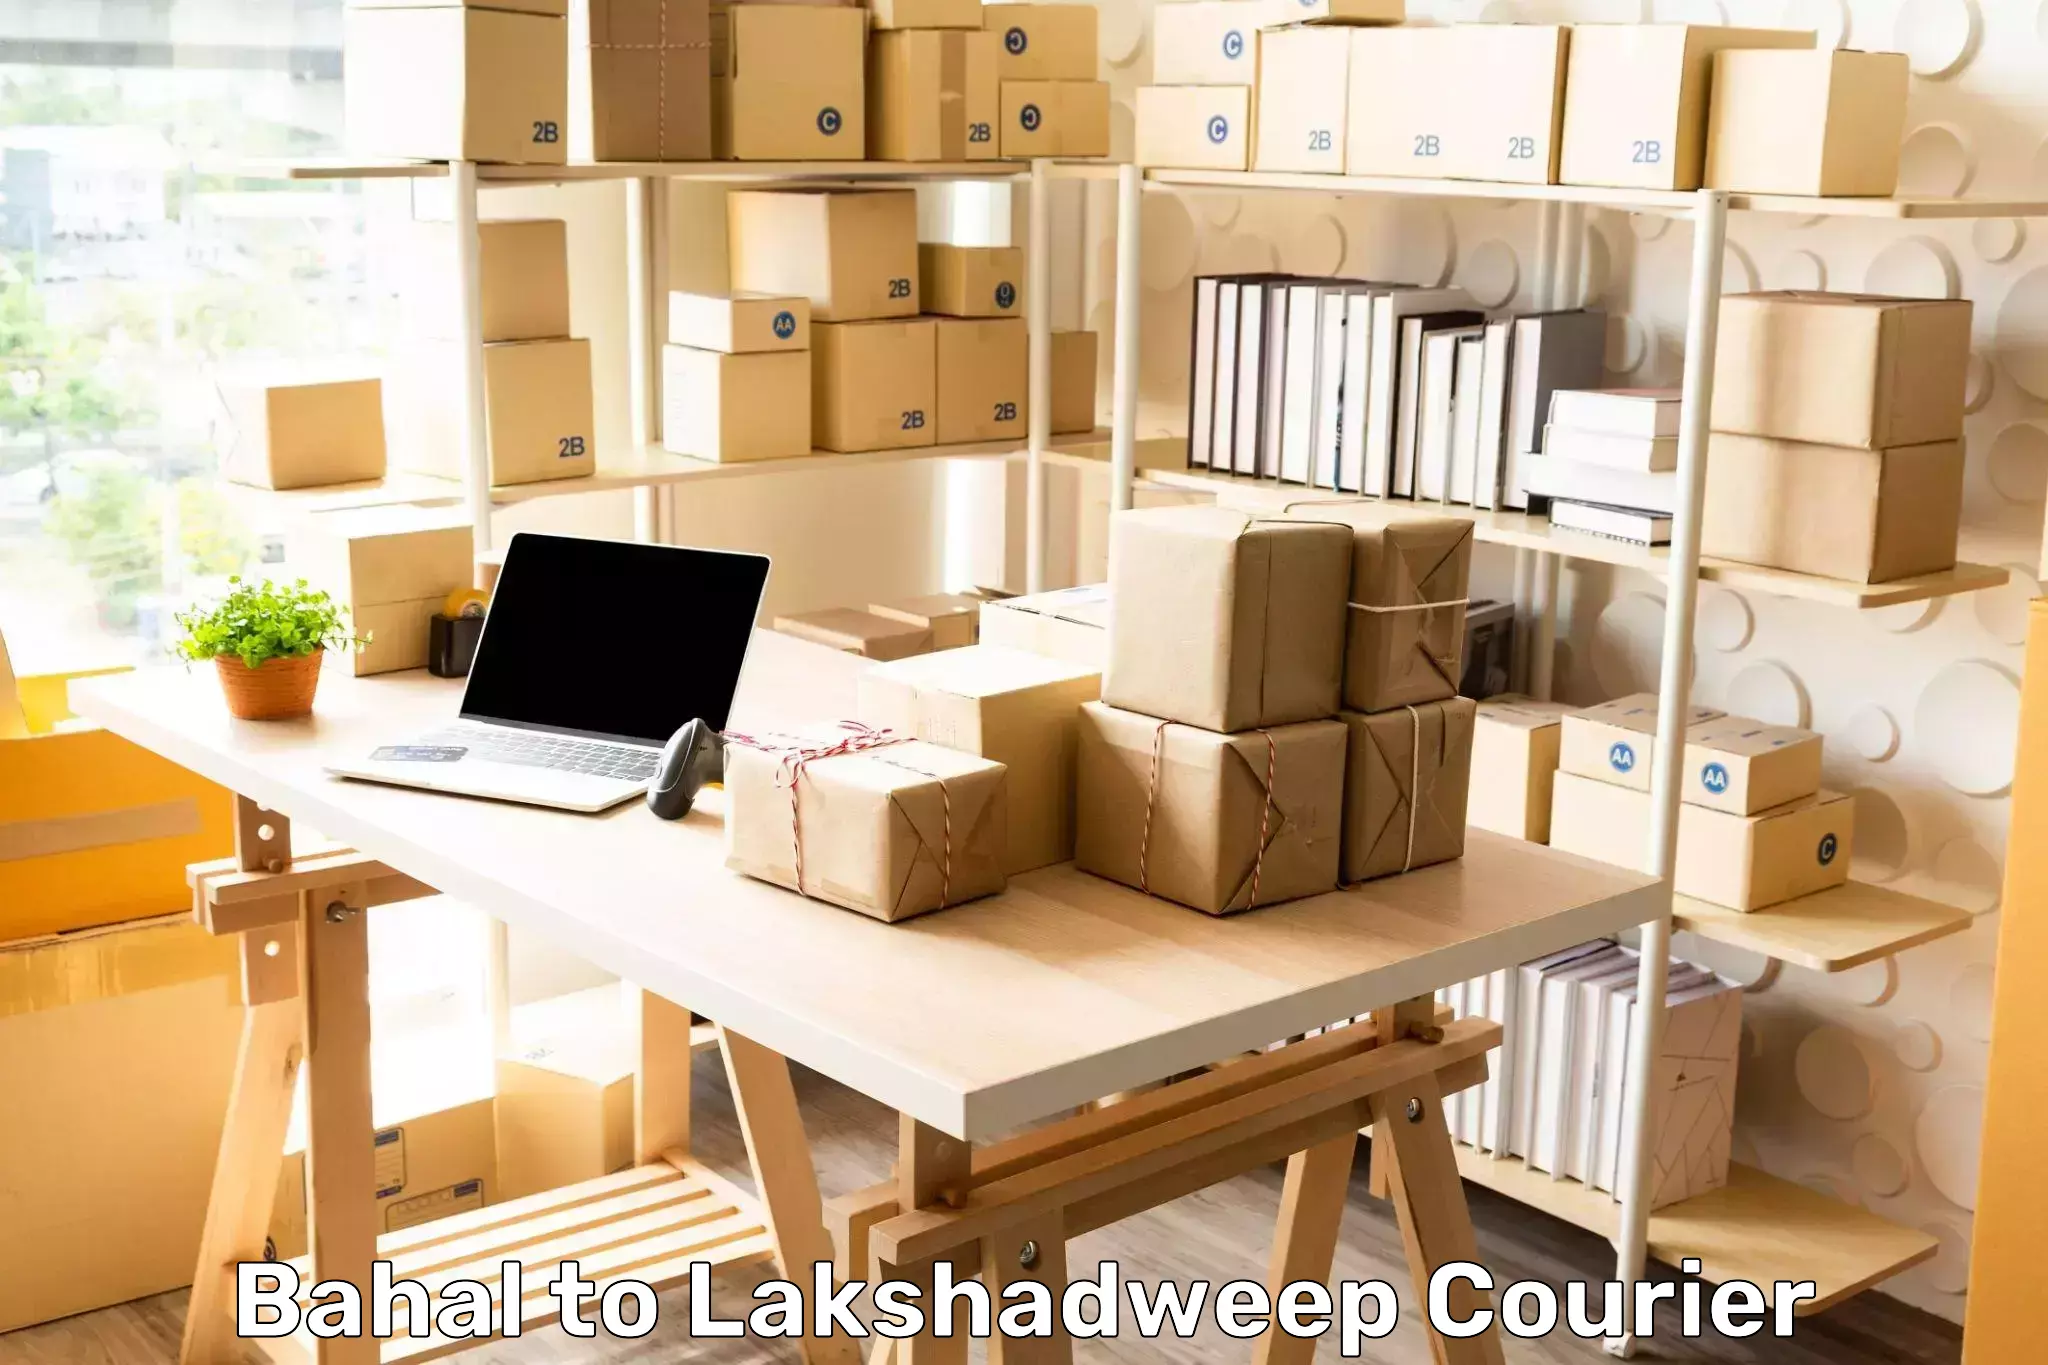 Express courier capabilities Bahal to Lakshadweep